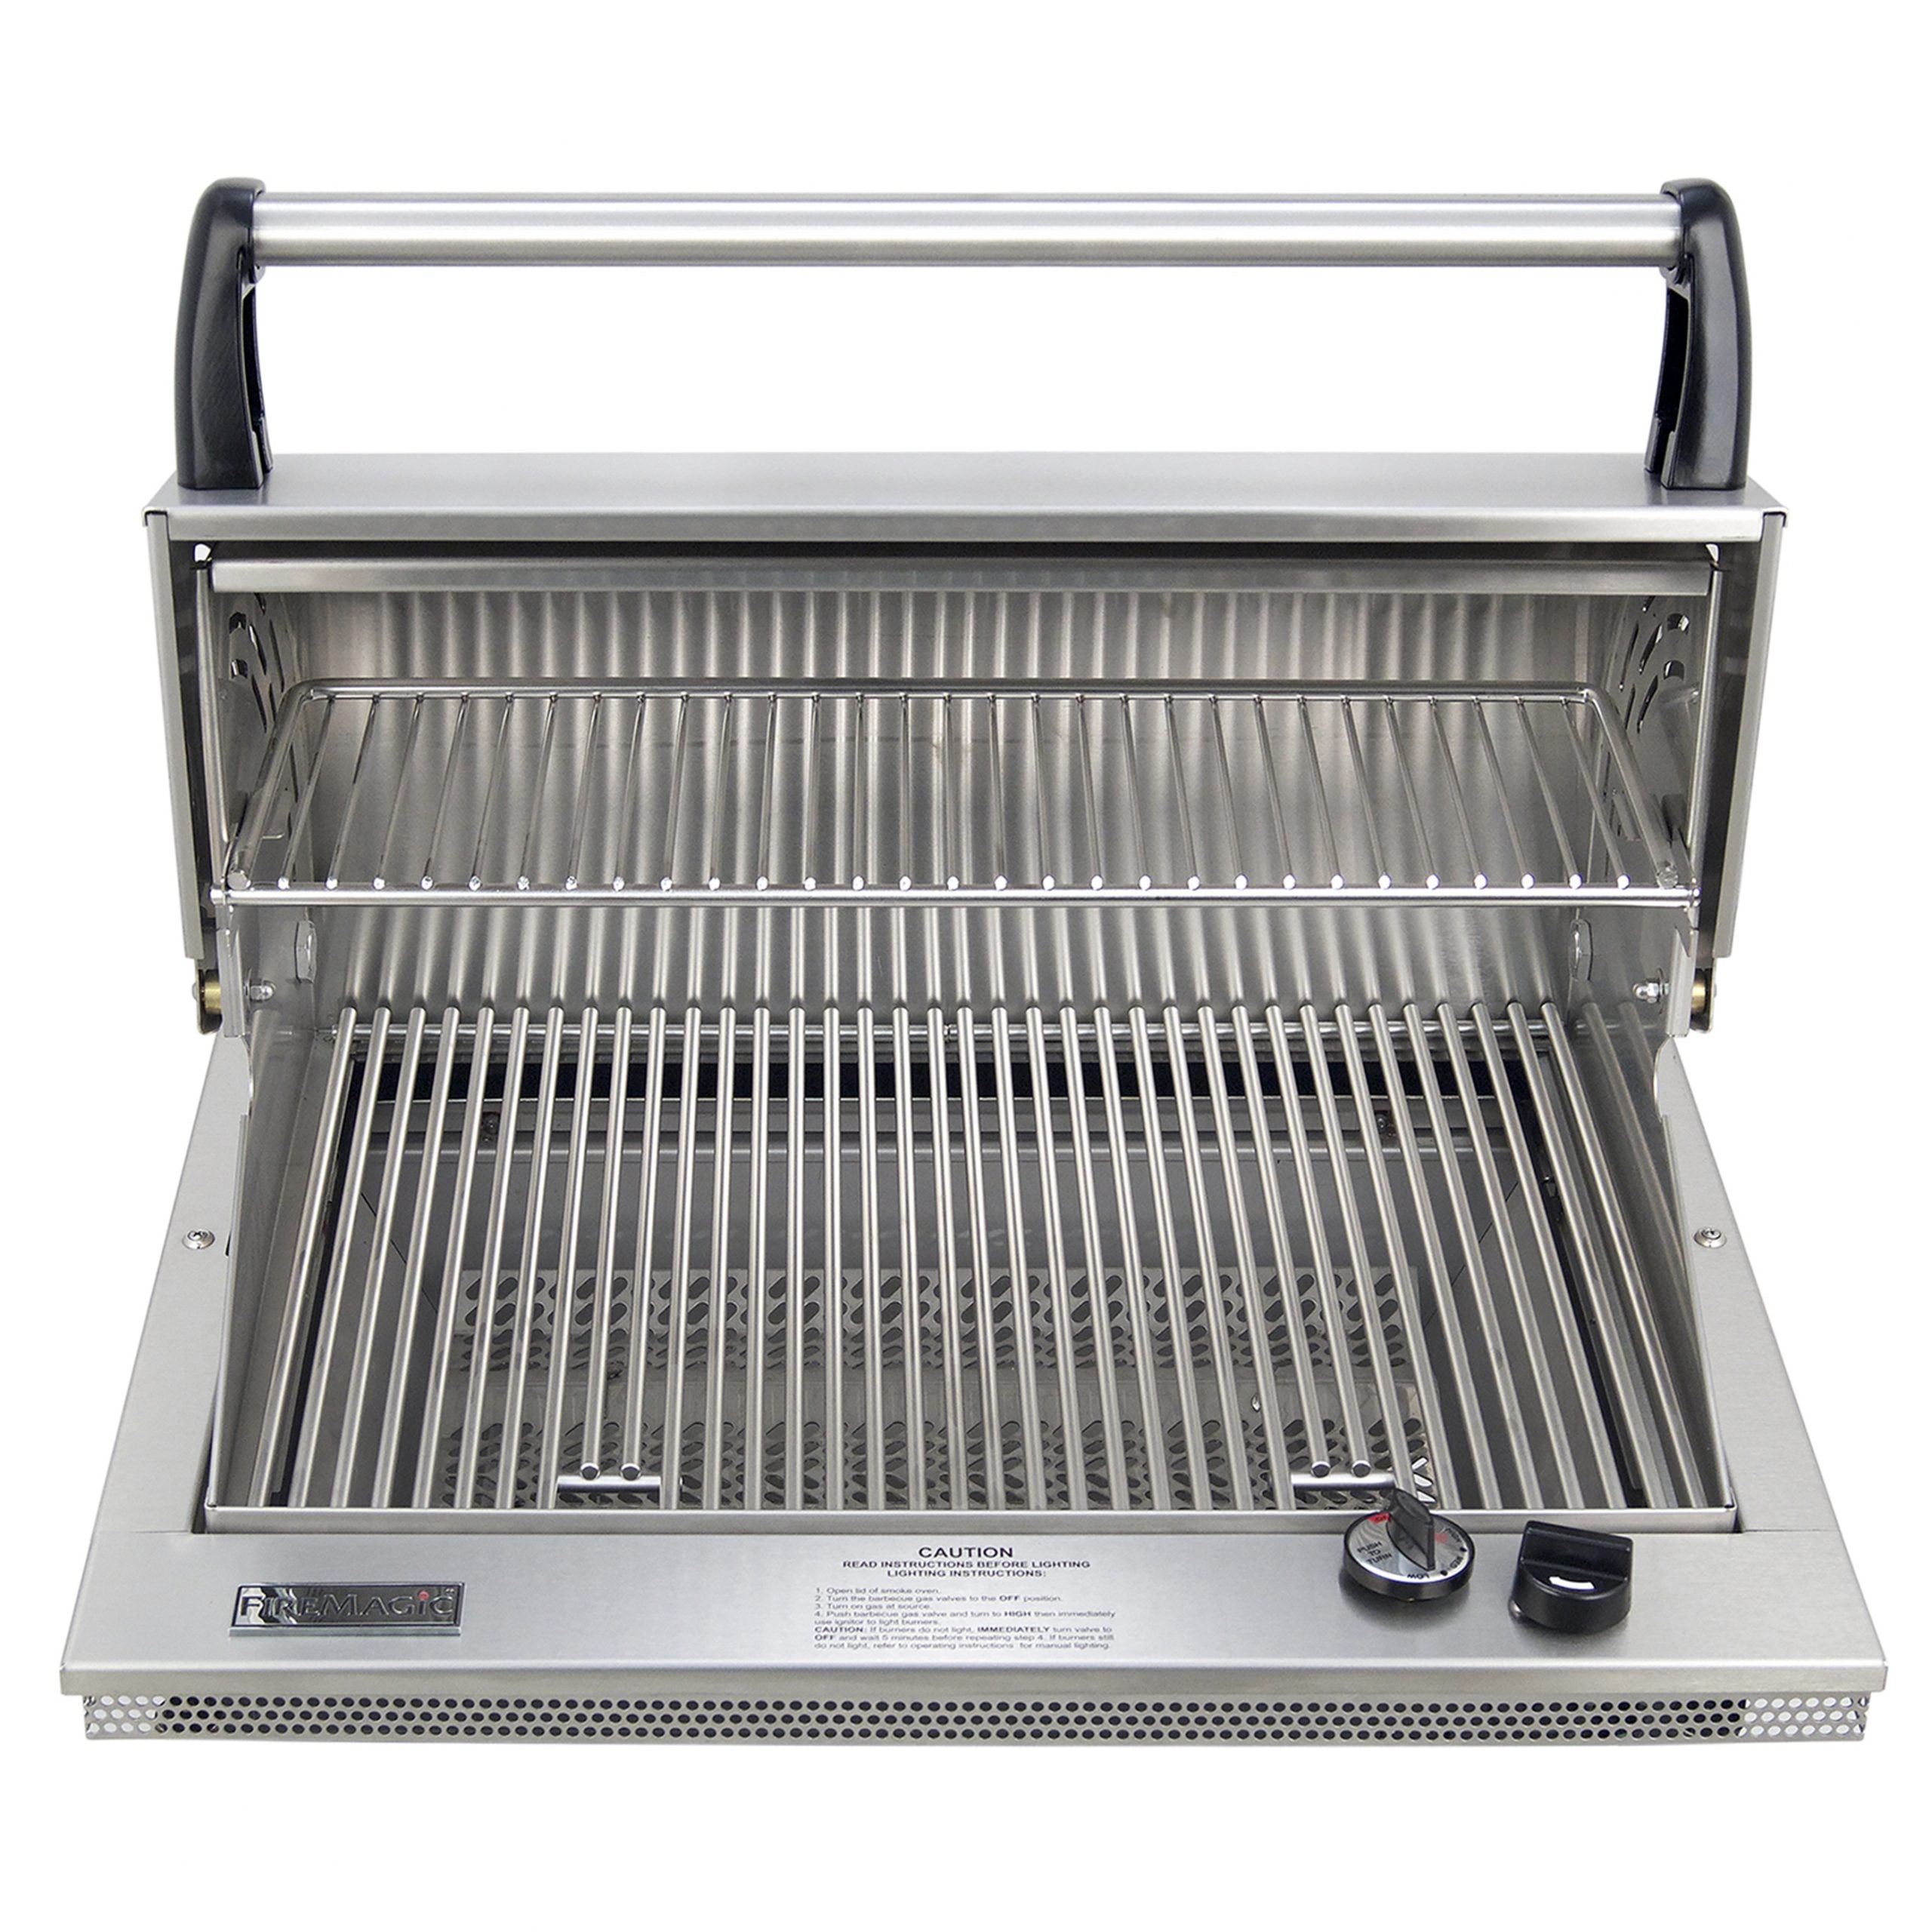 Fire Magic Deluxe Classic Drop-In Grill